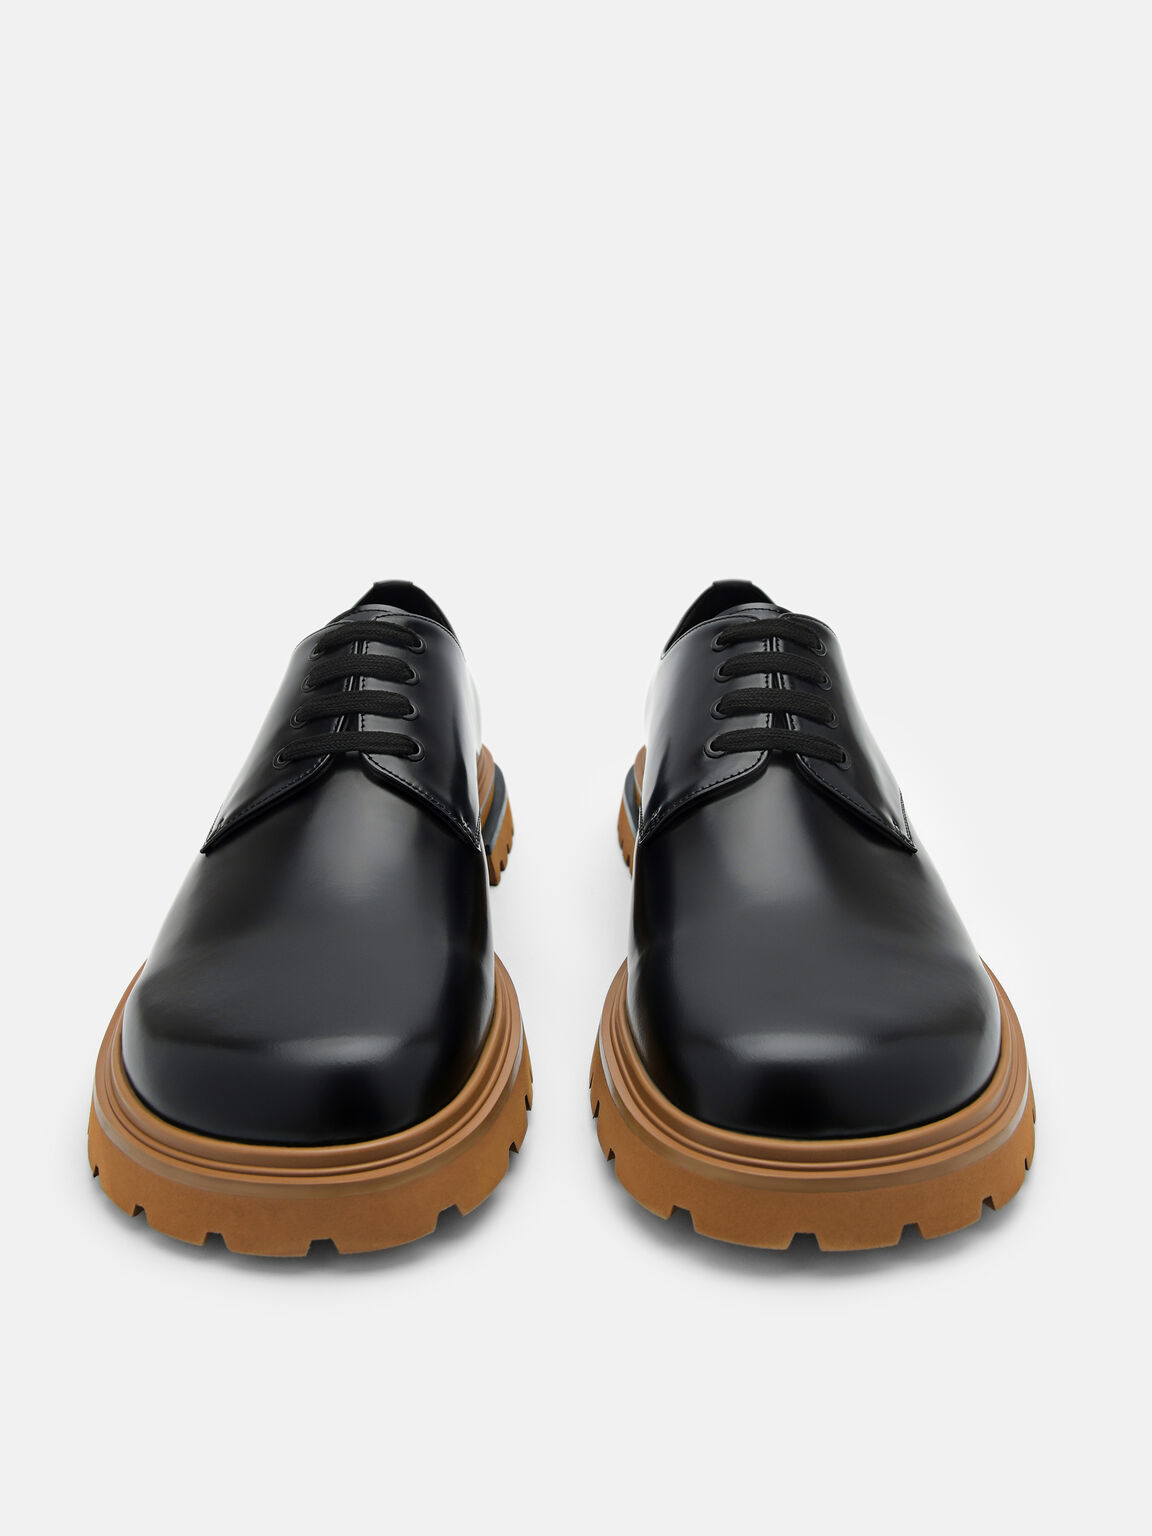 Cooper Leather Derby Shoes, Black